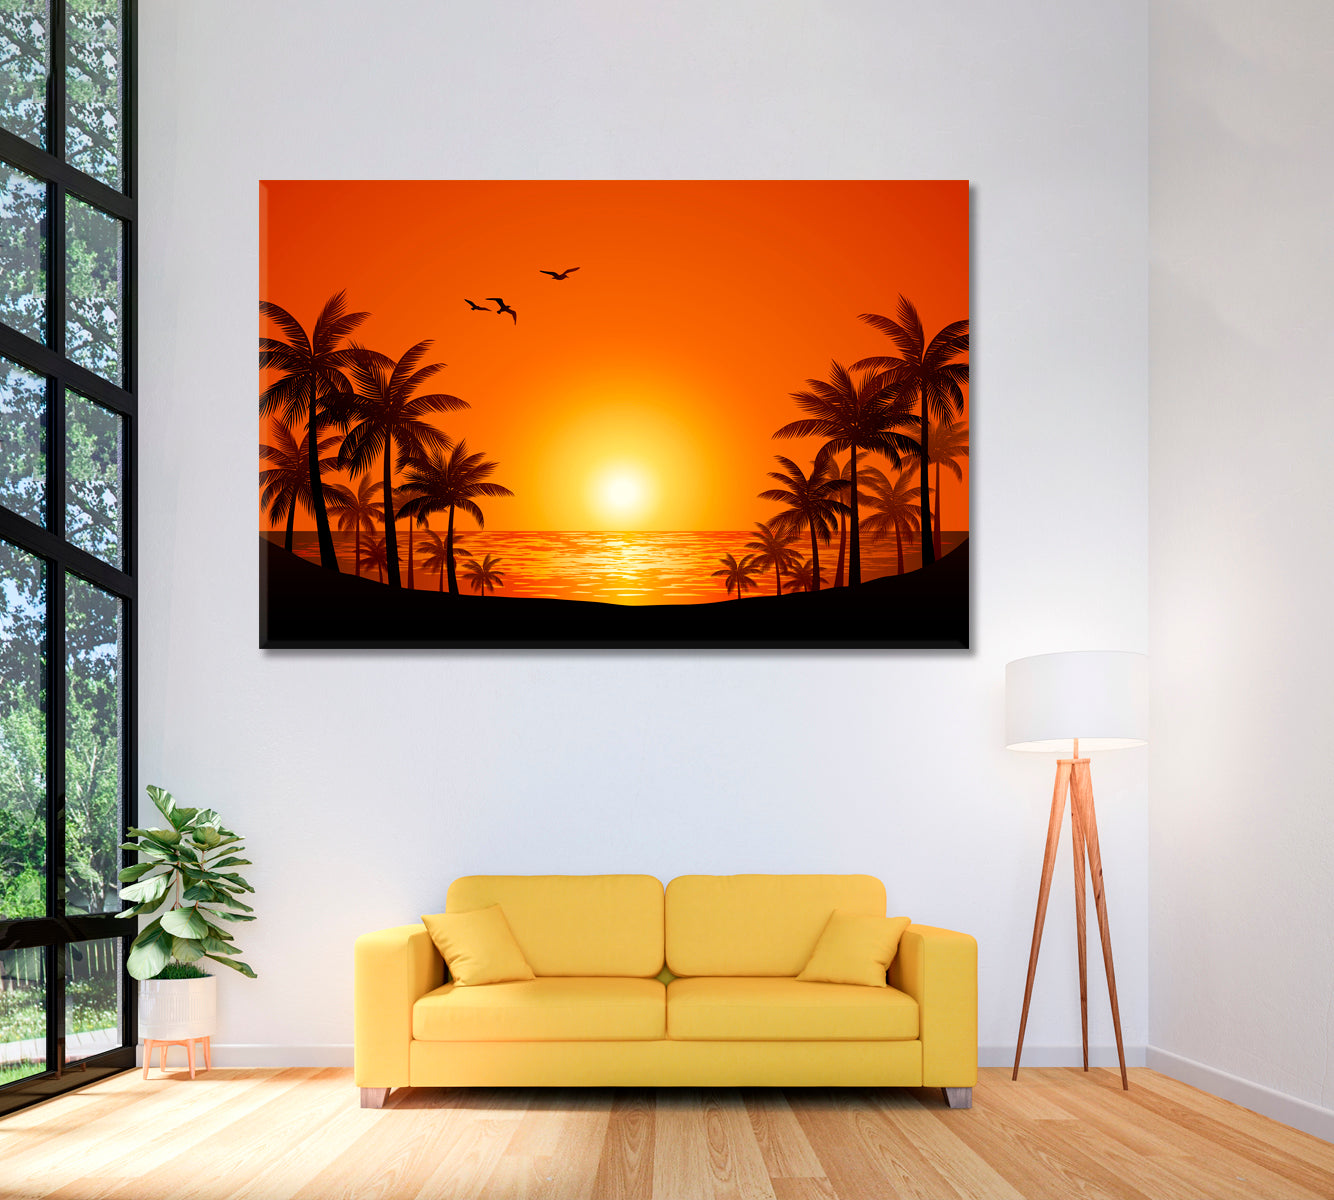 Hawaii Sunset Canvas Print ArtLexy 1 Panel 24"x16" inches 